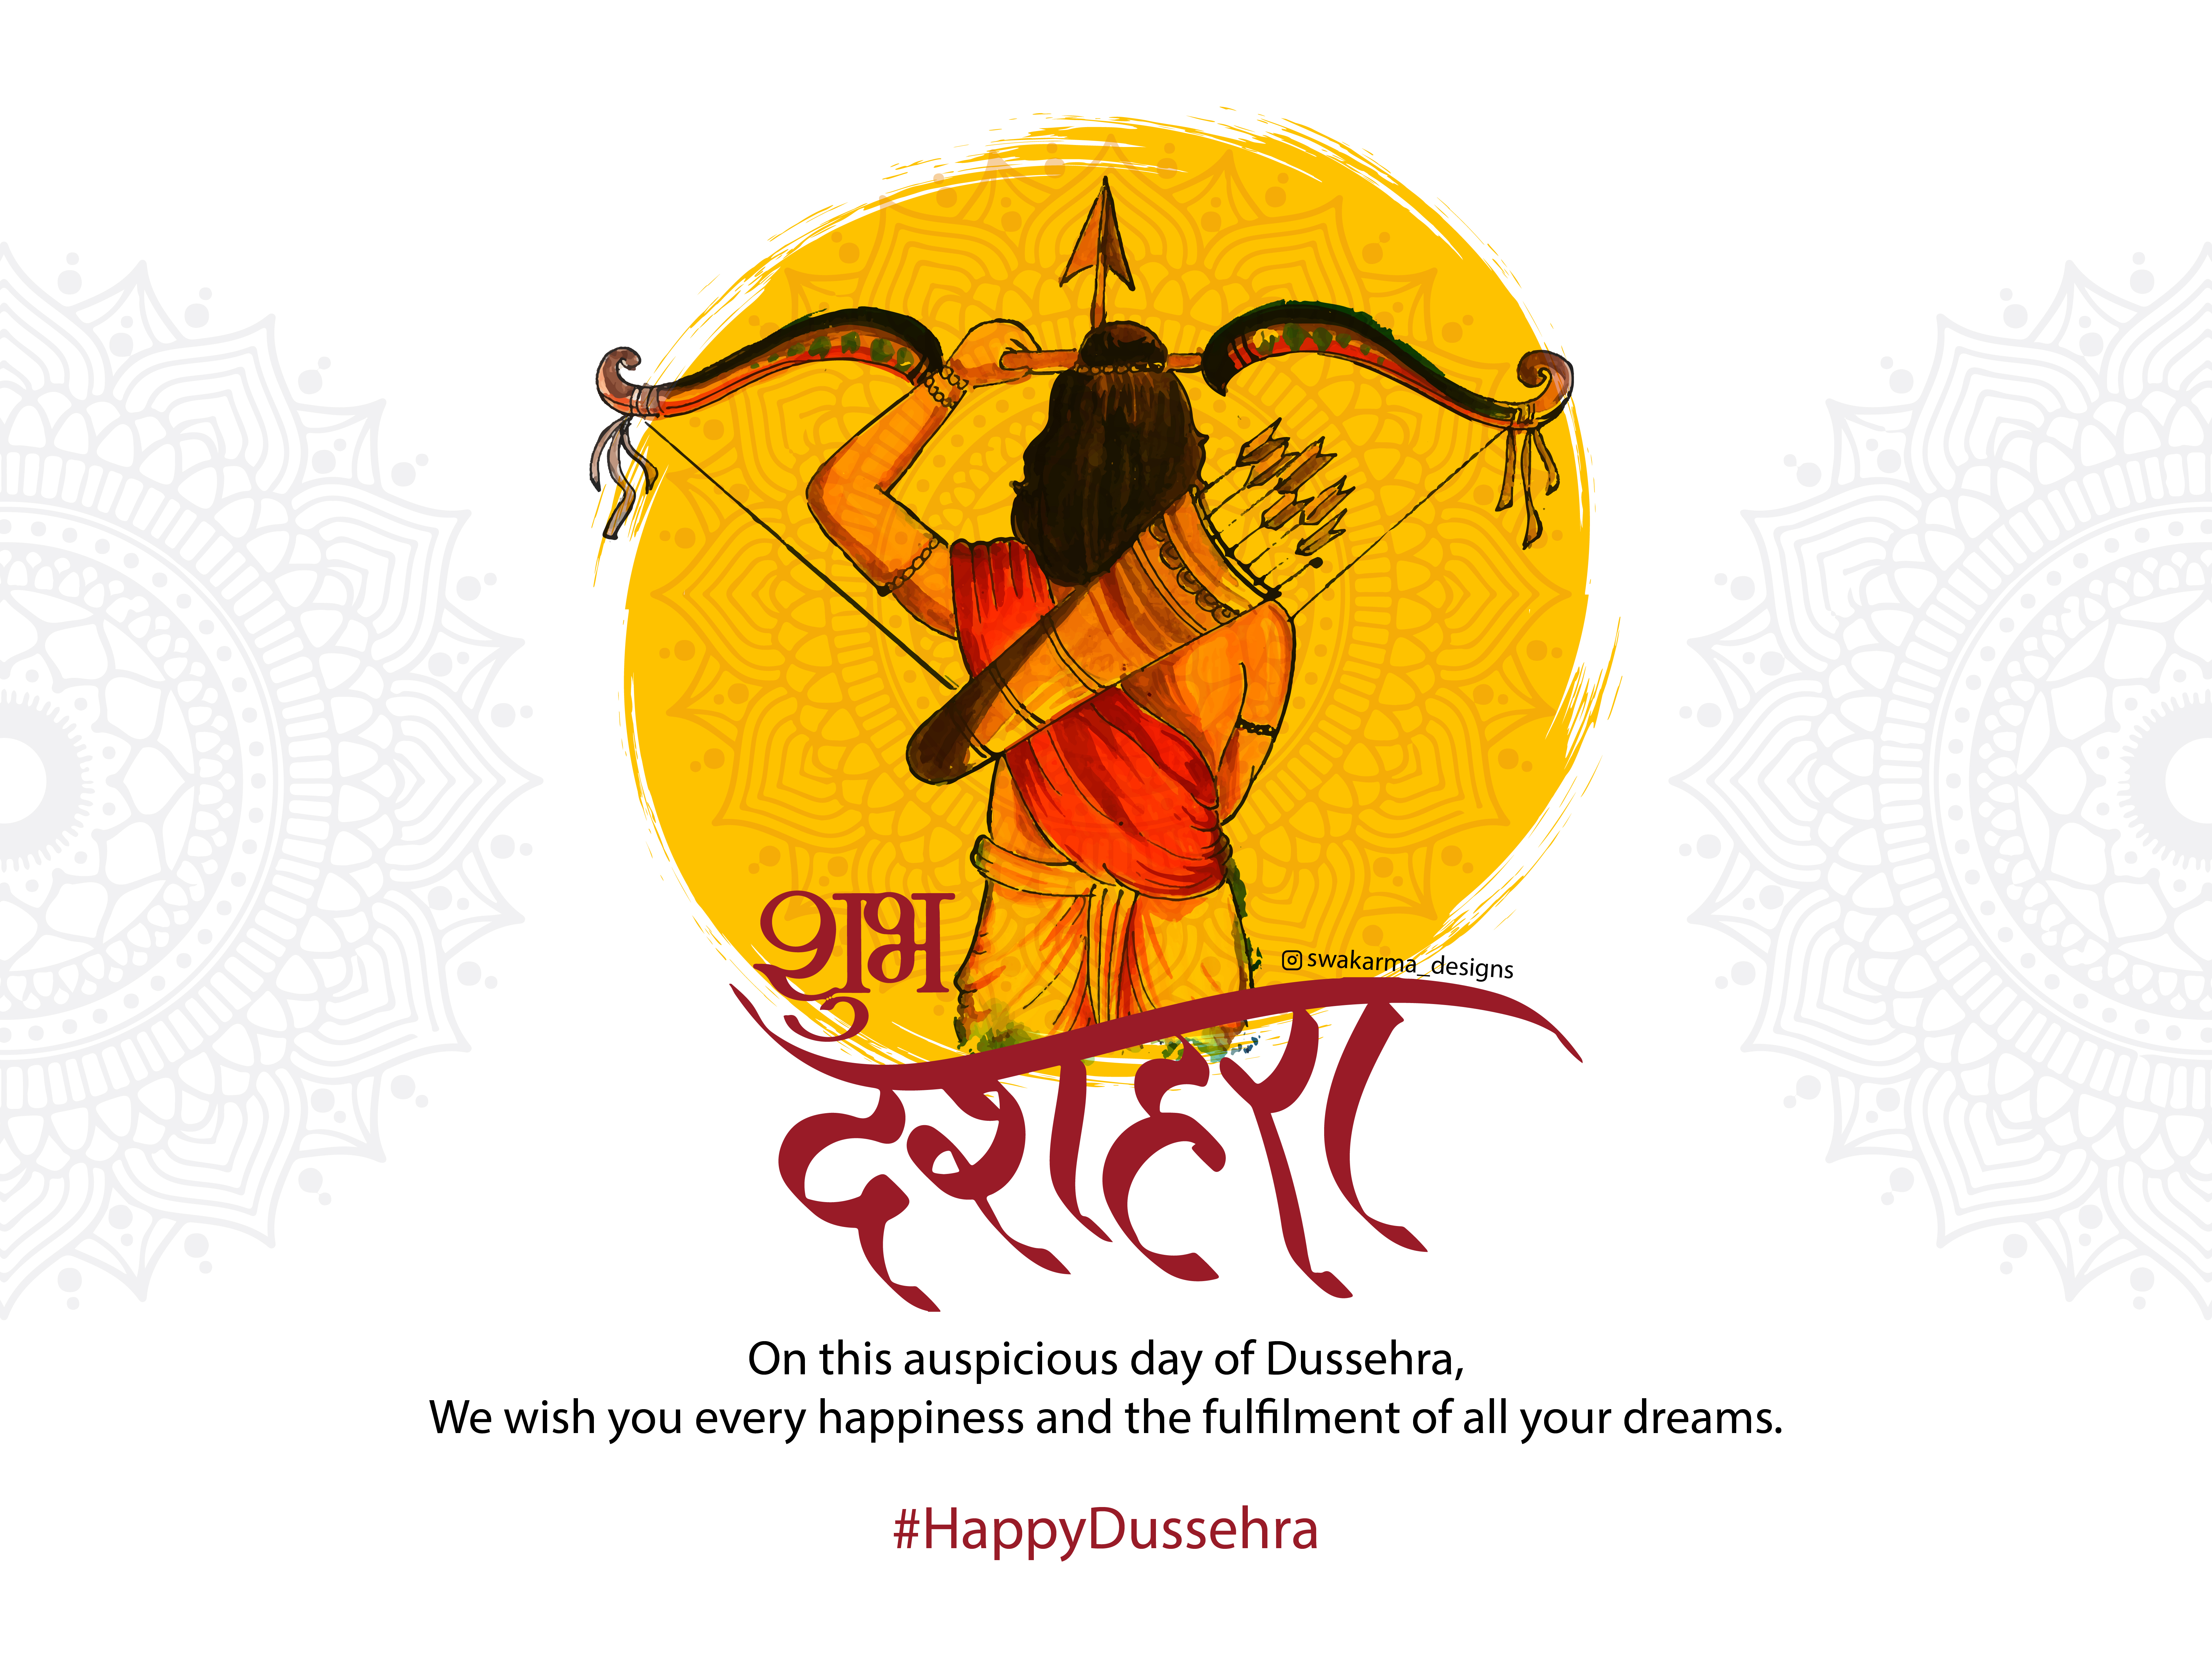 Happy Dussehra Hindu Festival Wishes Card Design Royalty Free SVG,  Cliparts, Vectors, and Stock Illustration. Image 156085881.